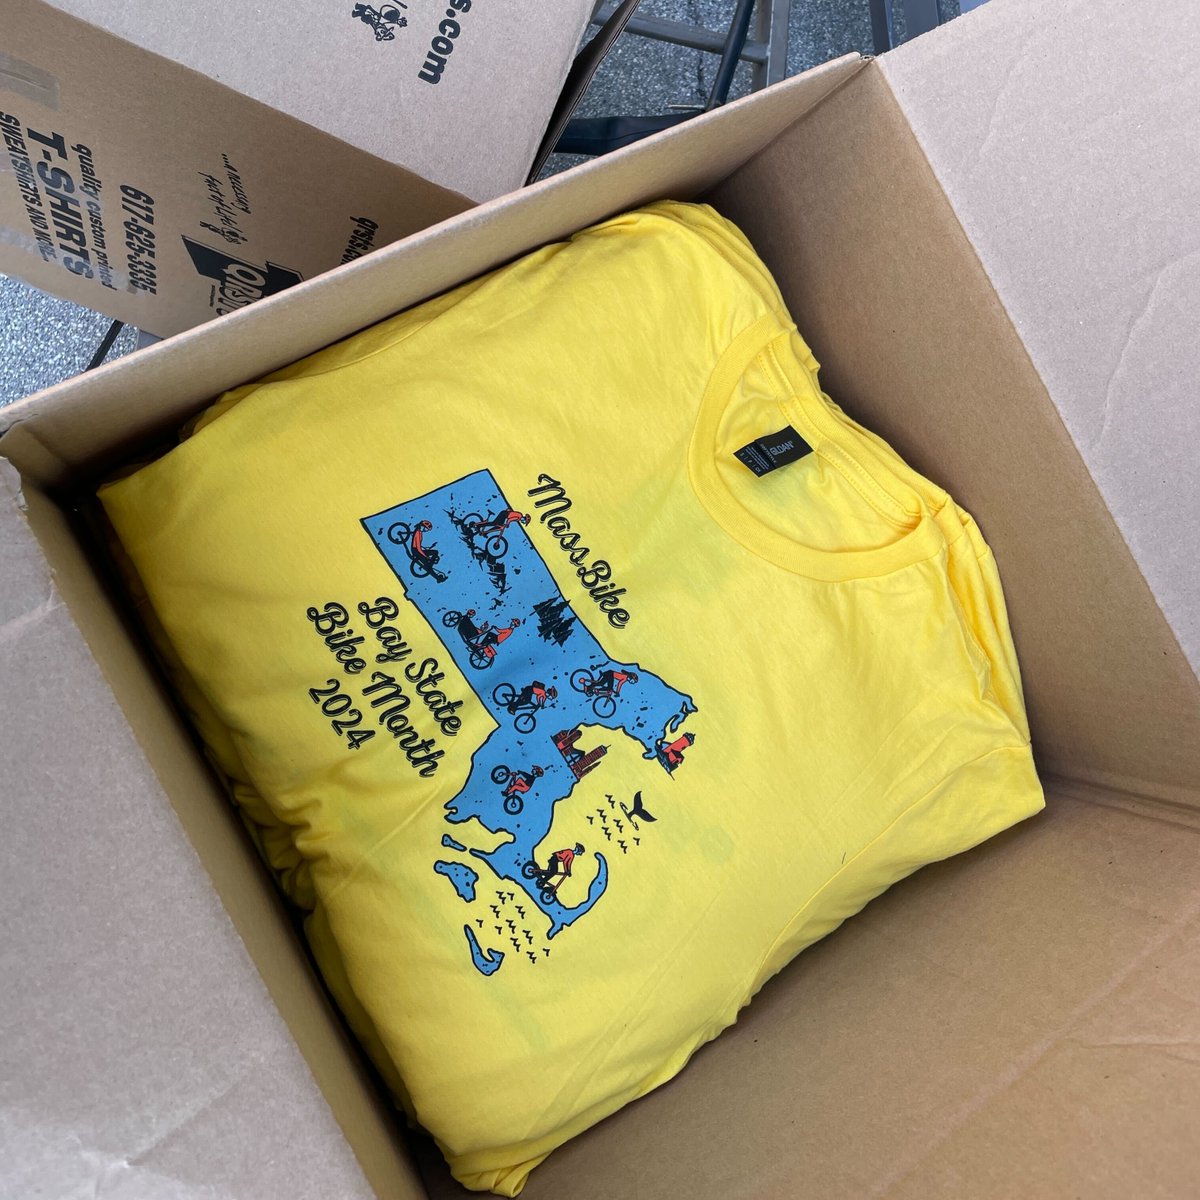 A big thanks to @QRSTS_Boston for another amazing job printing our Bay State Bike Month T-shirts. We appreciate your support! Check out the Bay State Bike Month page to learn how you can get one of these great shirts: massbike.org/bike-month